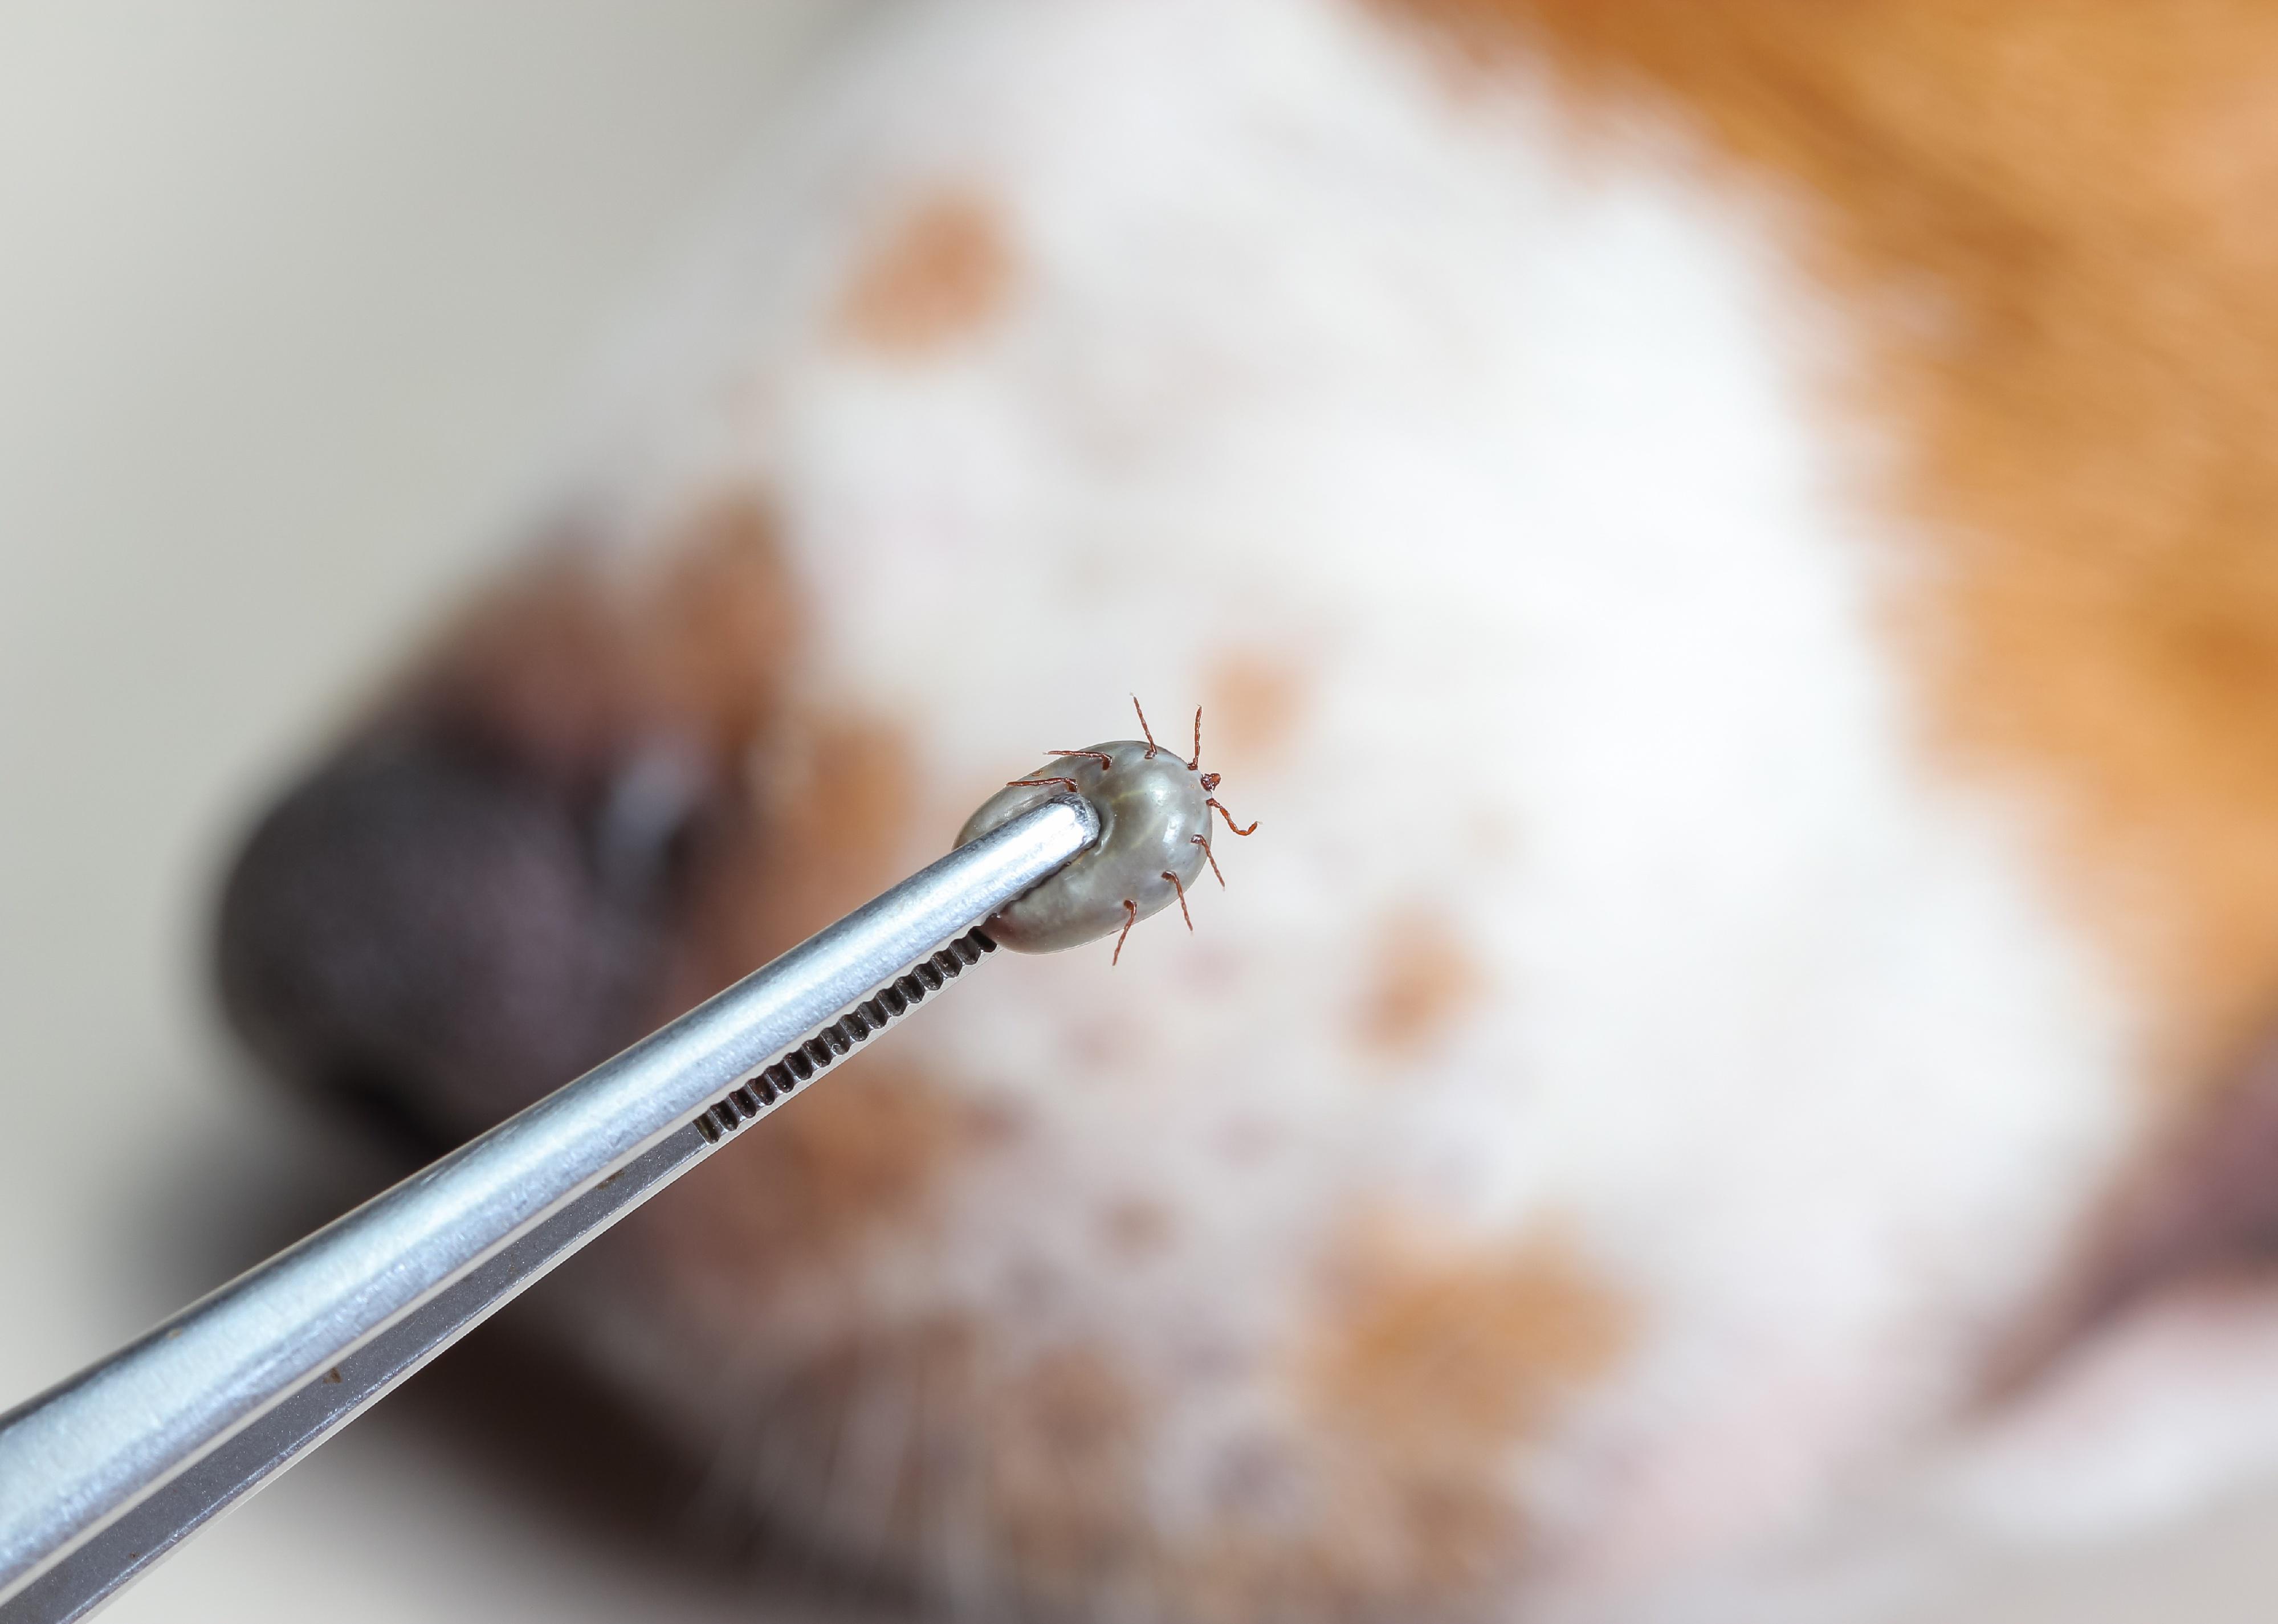 Closeup of human hands with pliers holding a tick.